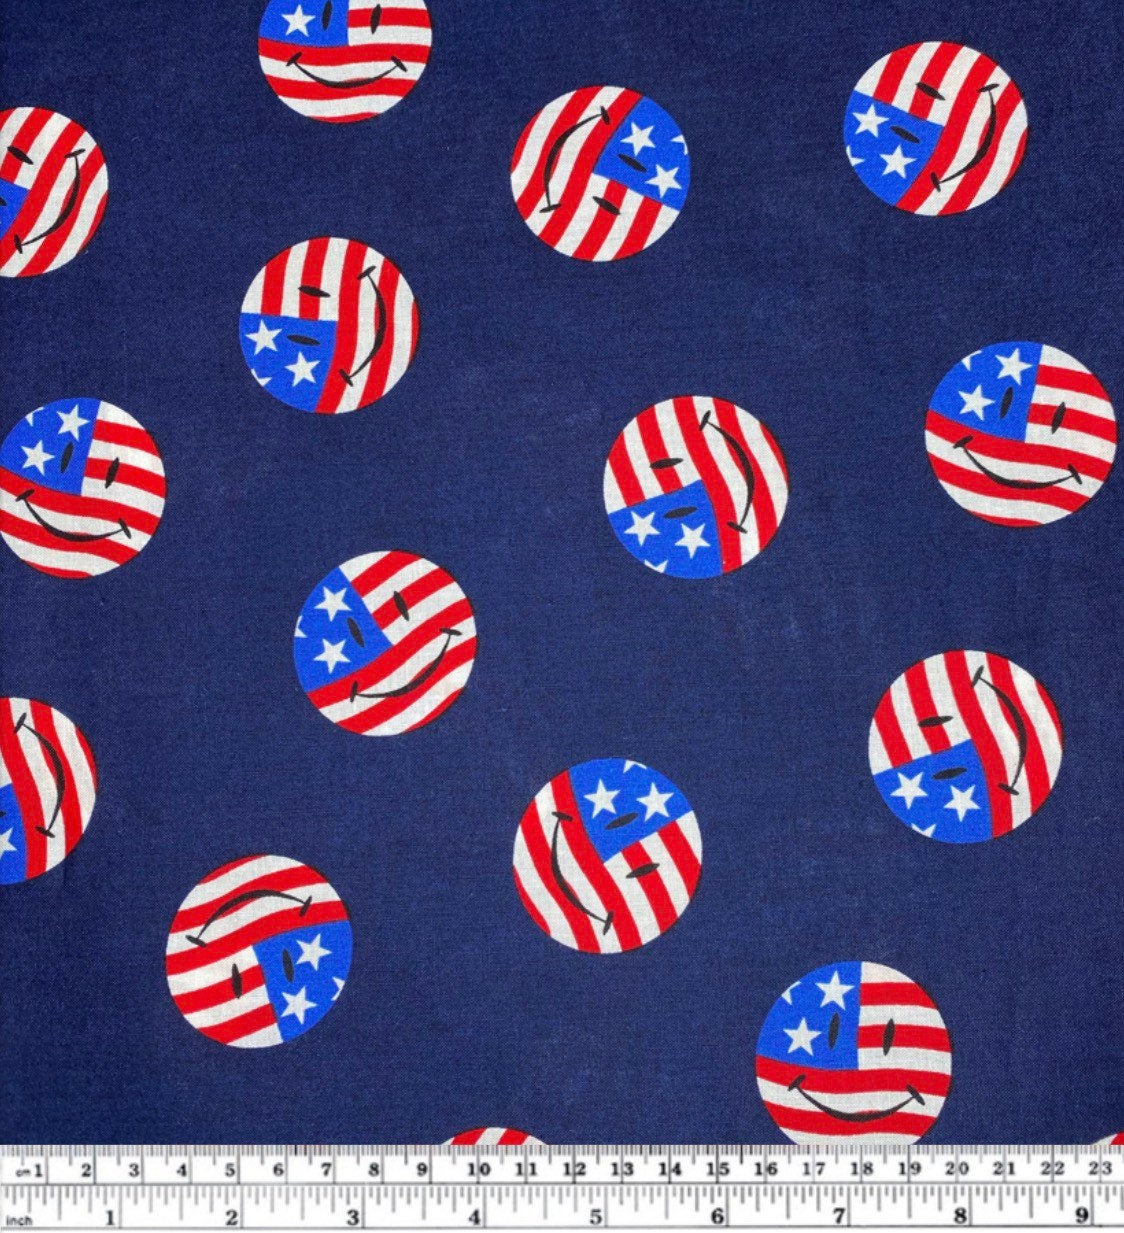 Quilting Cotton - American Smiley Face